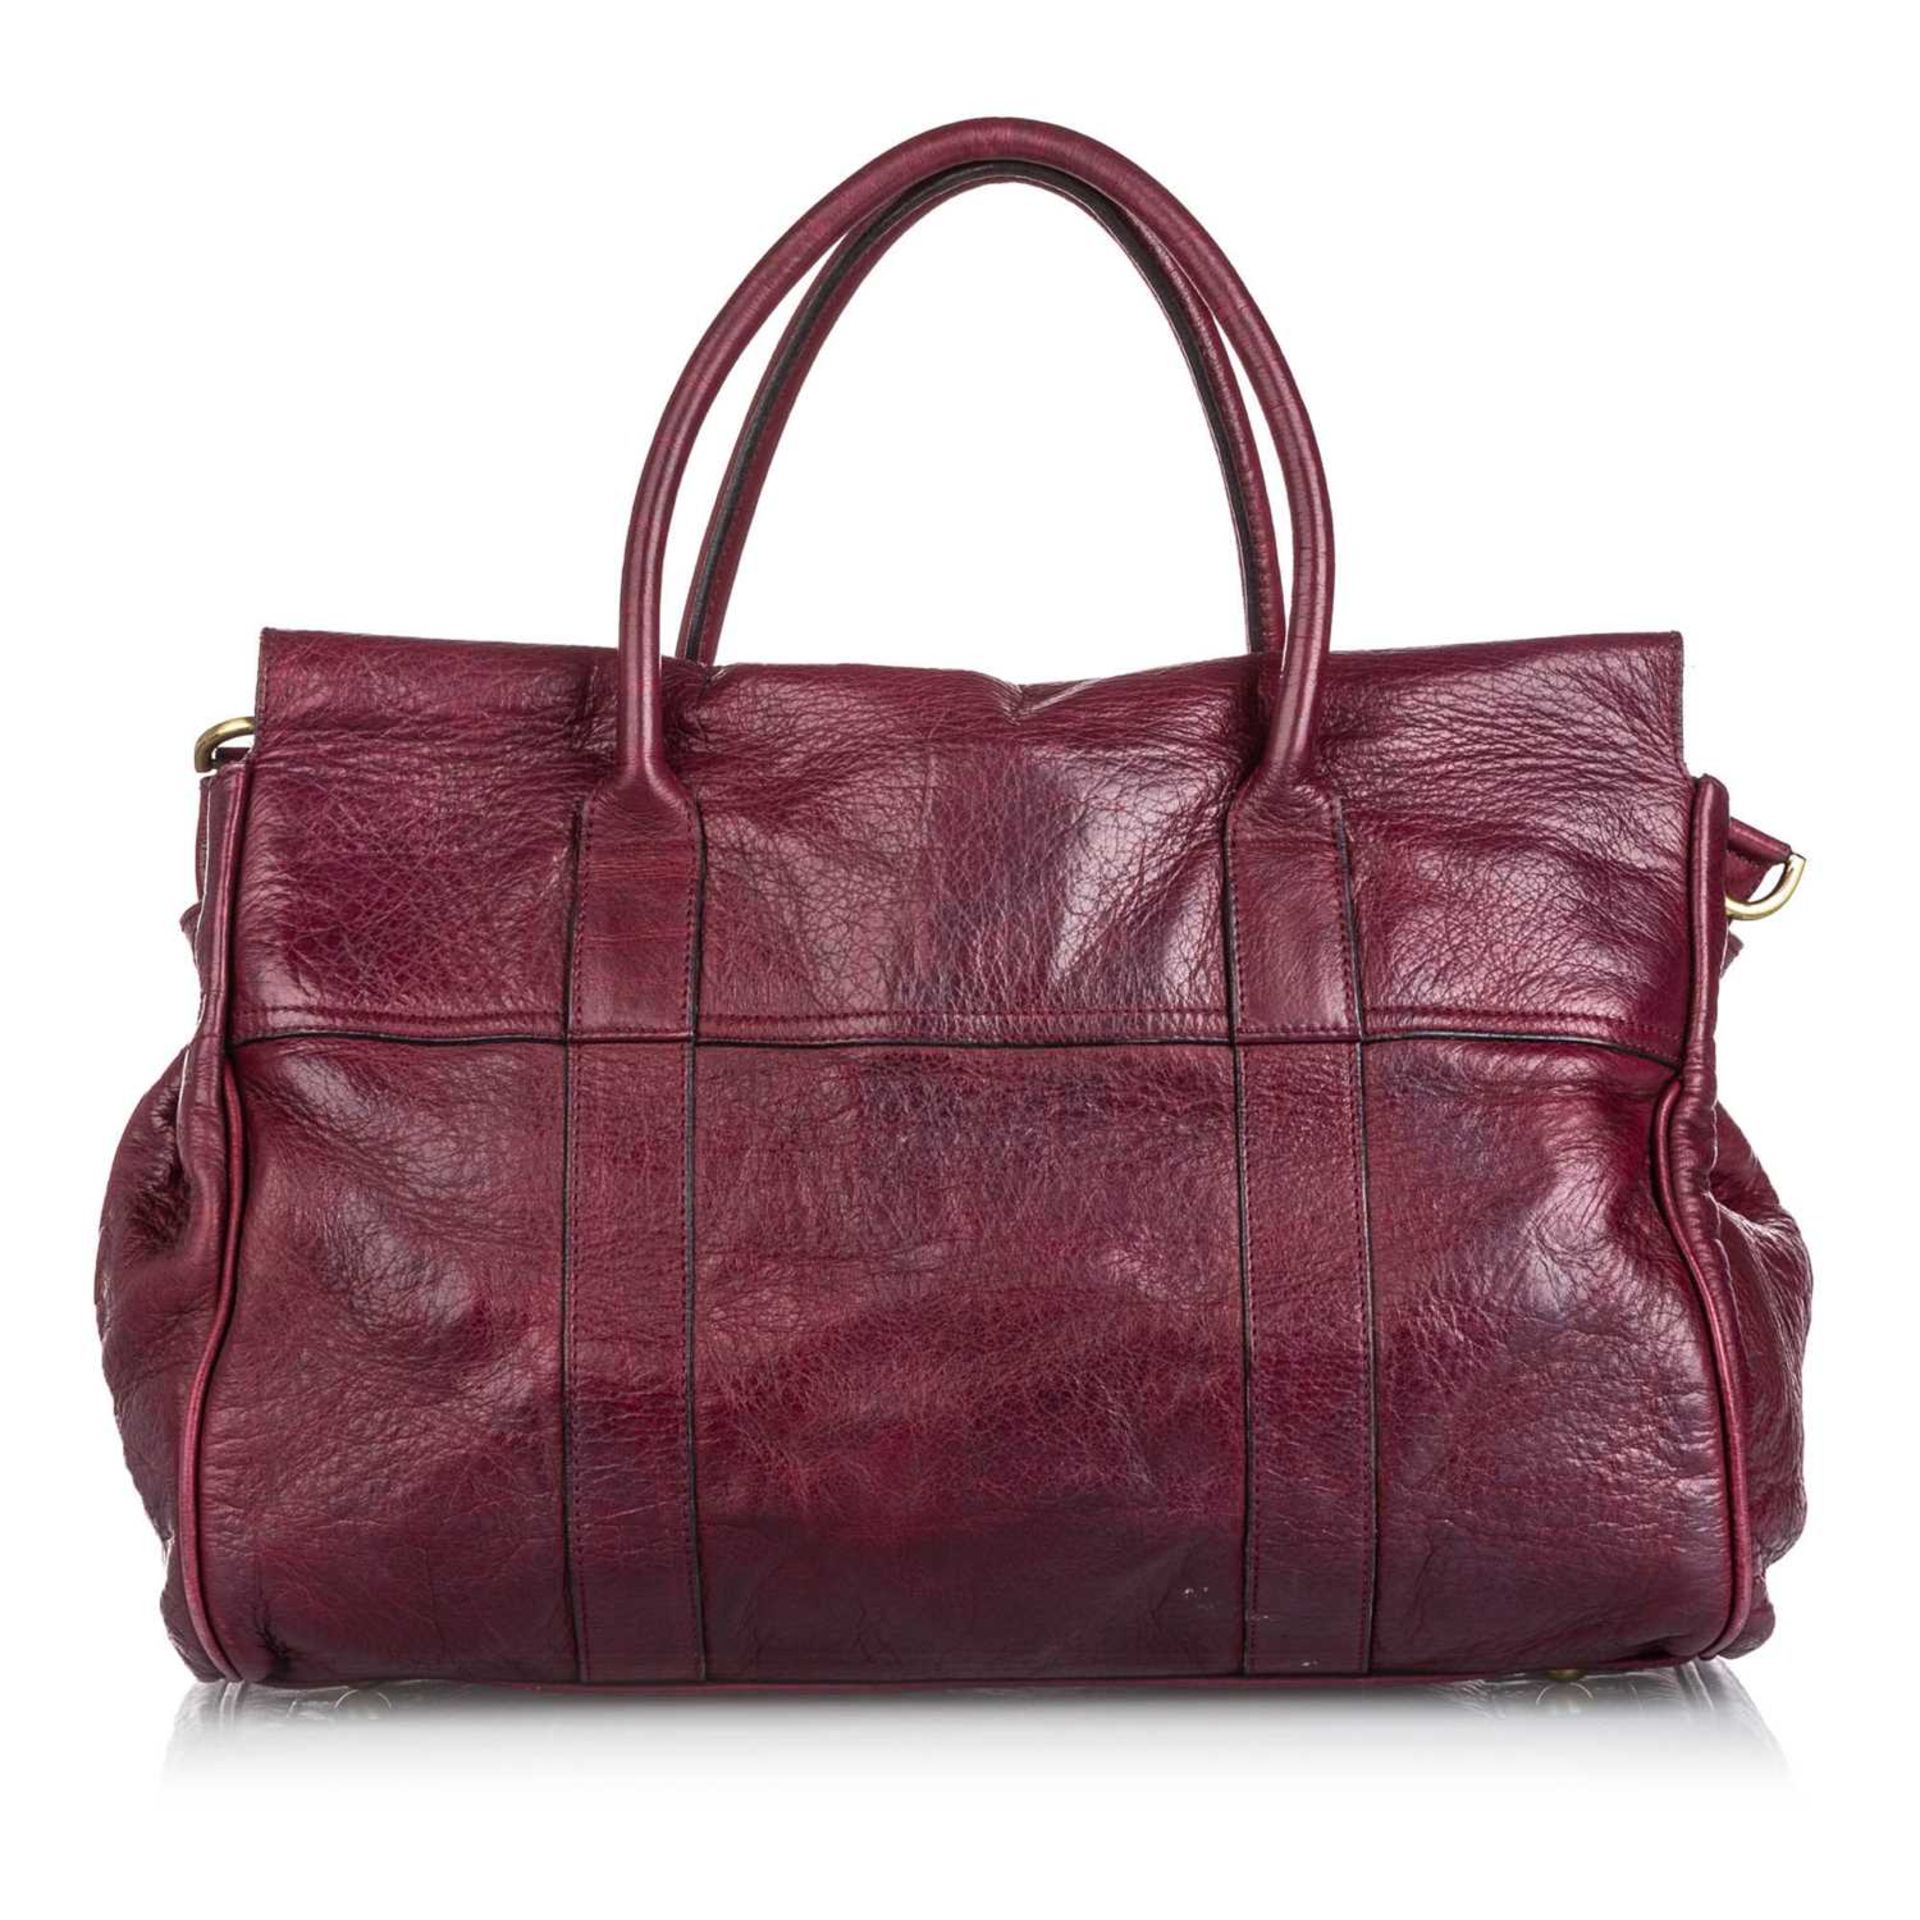 A Mulberry red leather 'Bayswater' satchel, - Image 20 of 20